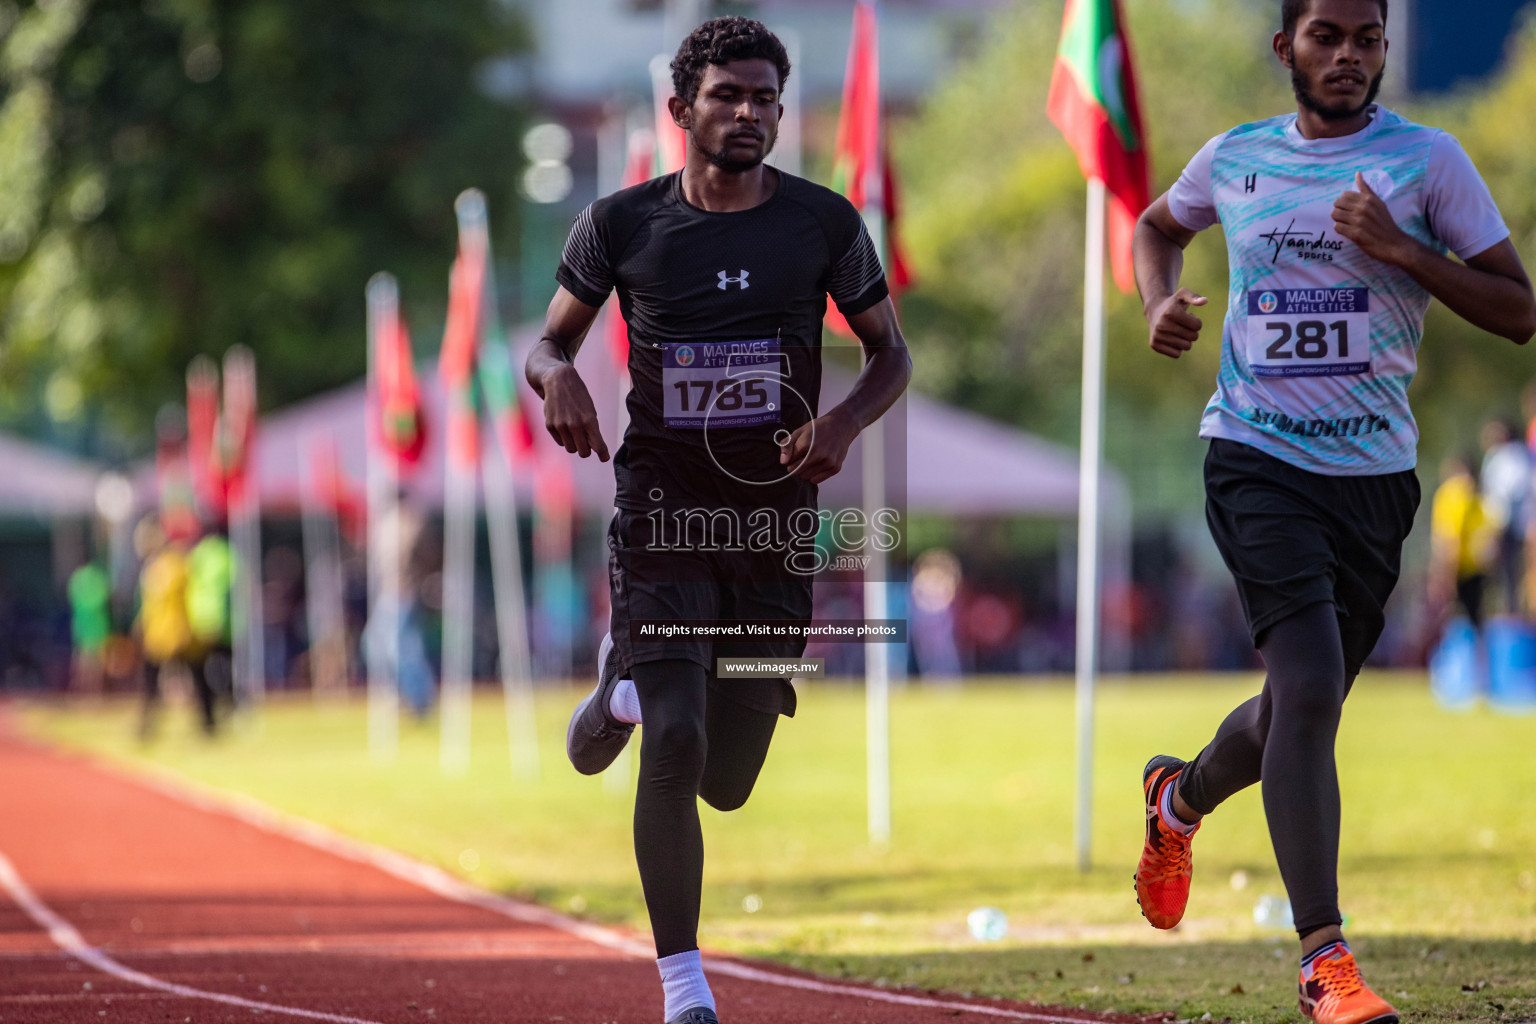 Day 5 of Inter-School Athletics Championship held in Male', Maldives on 27th May 2022. Photos by:Maanish / images.mv